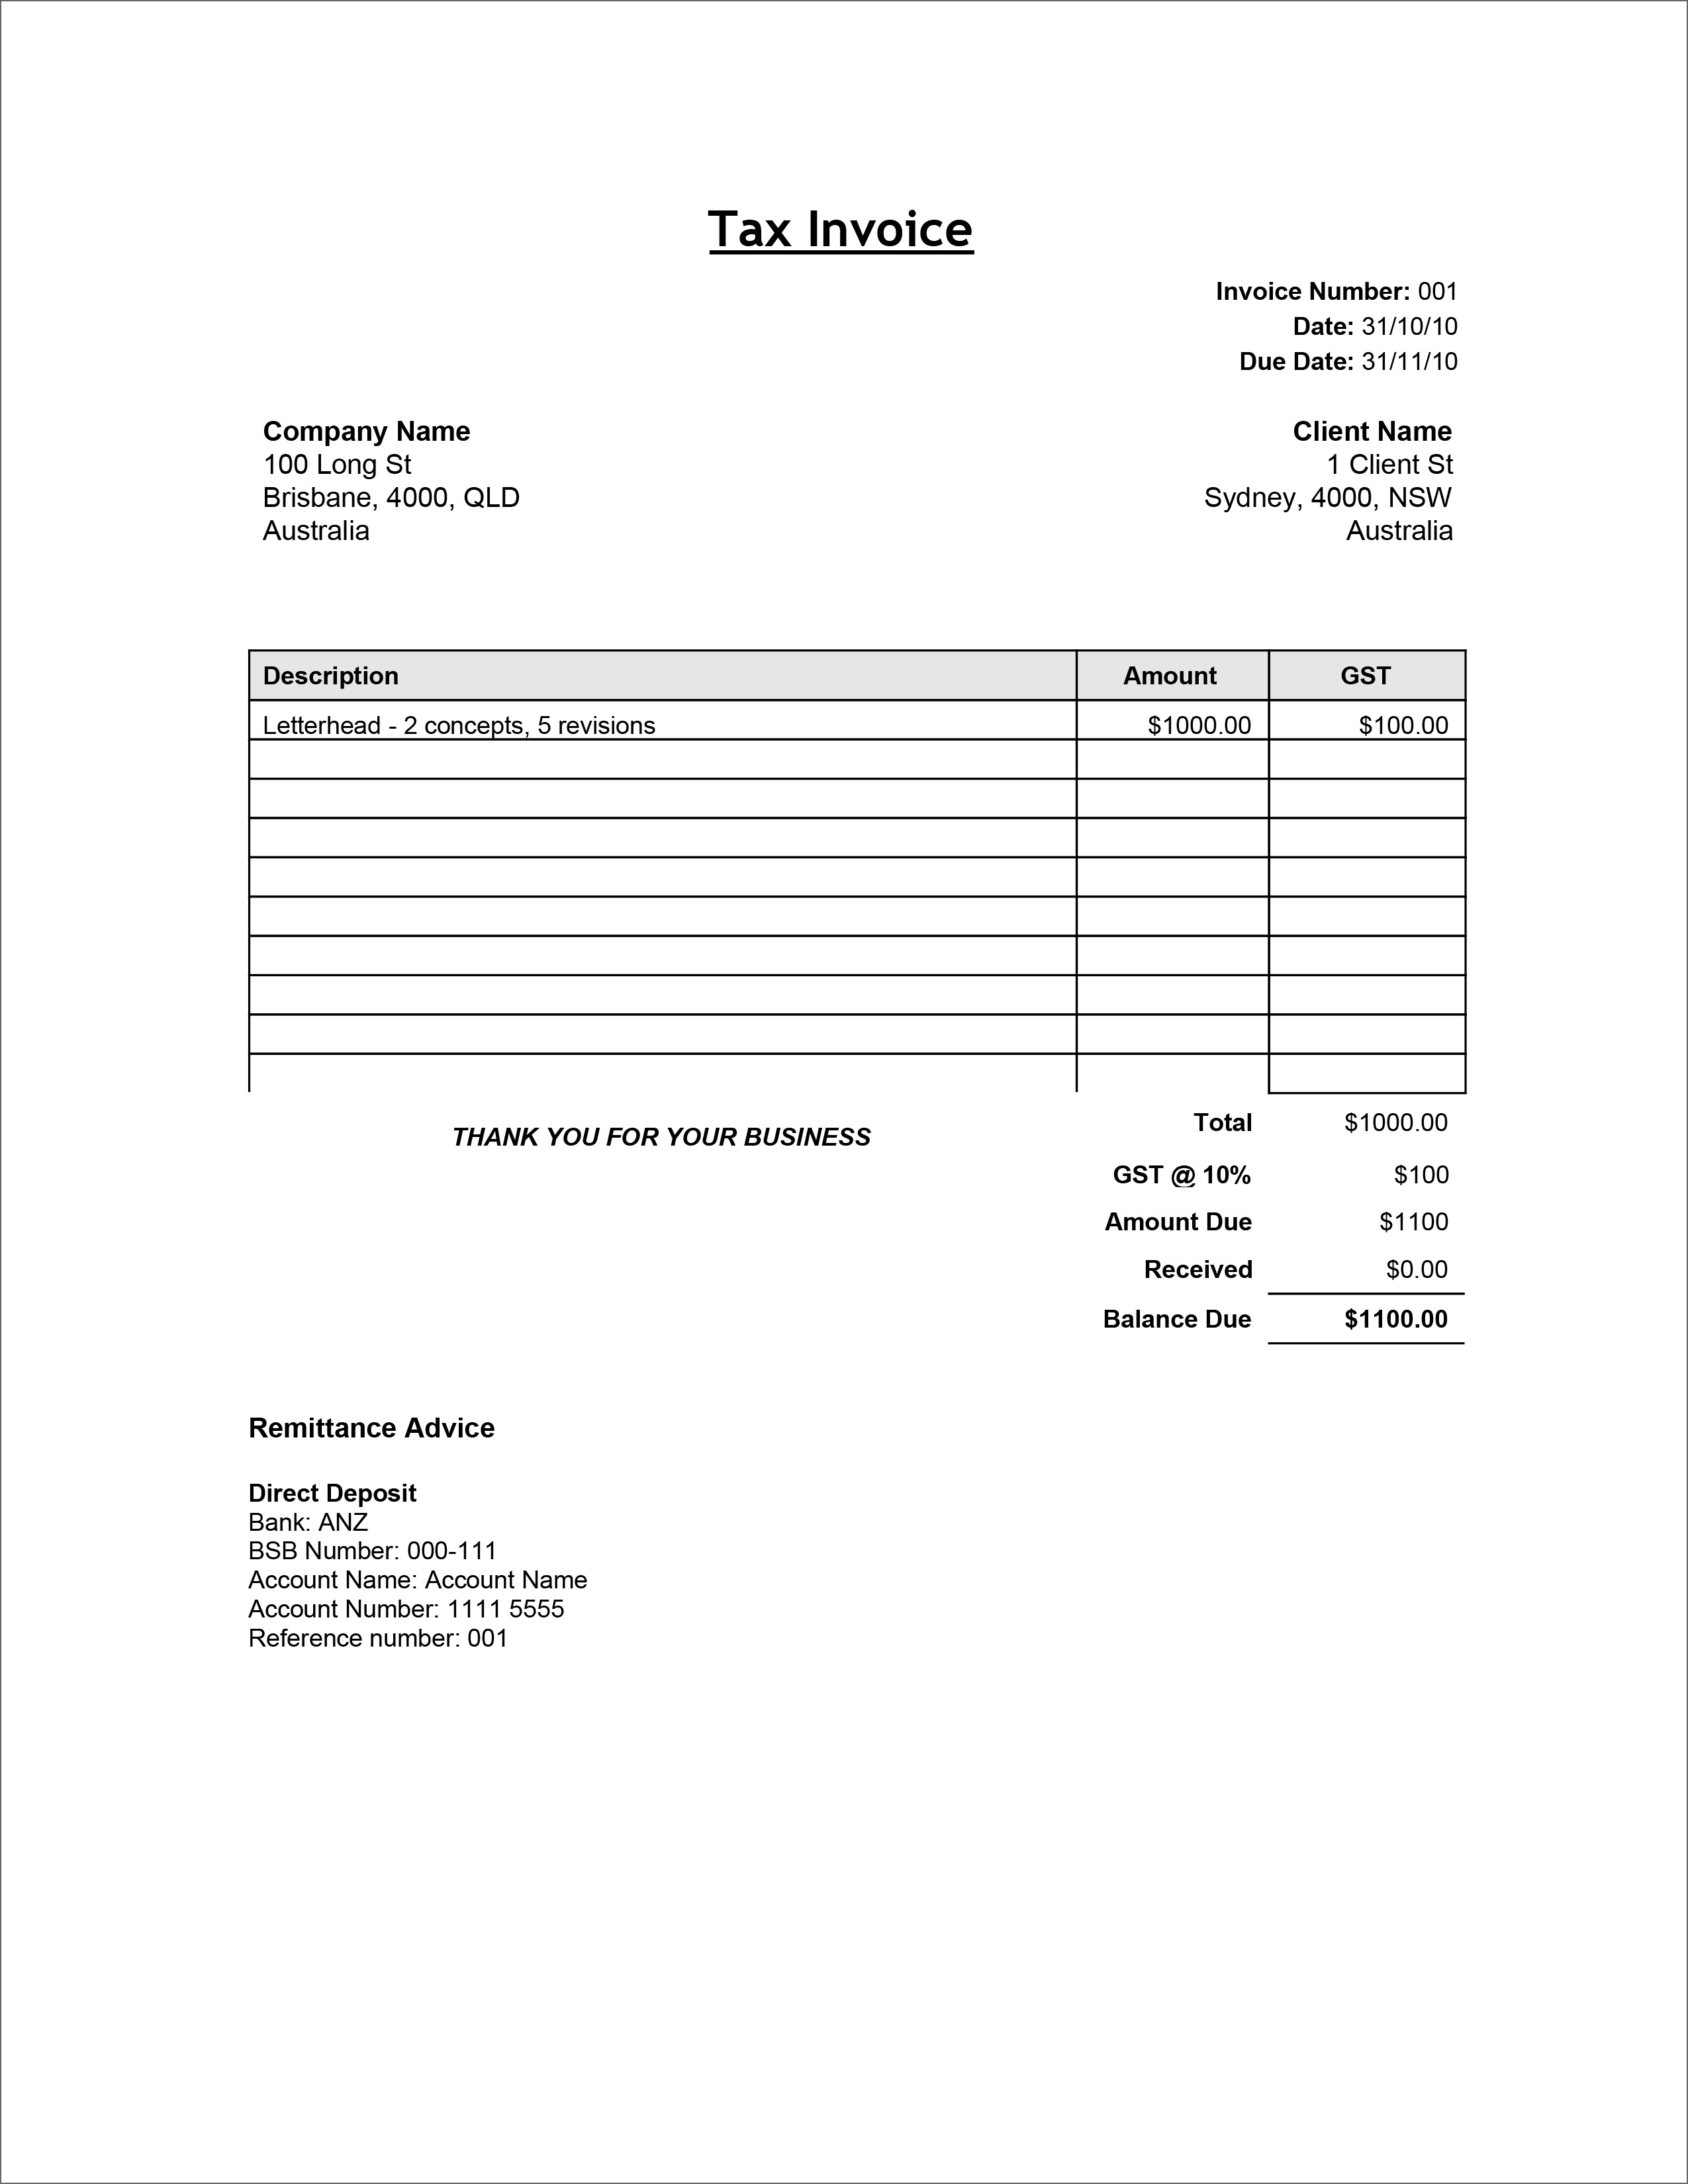 20 Free Invoice Templates In Microsoft Excel And DOCX Formats Inside Tax Invoice Template Doc